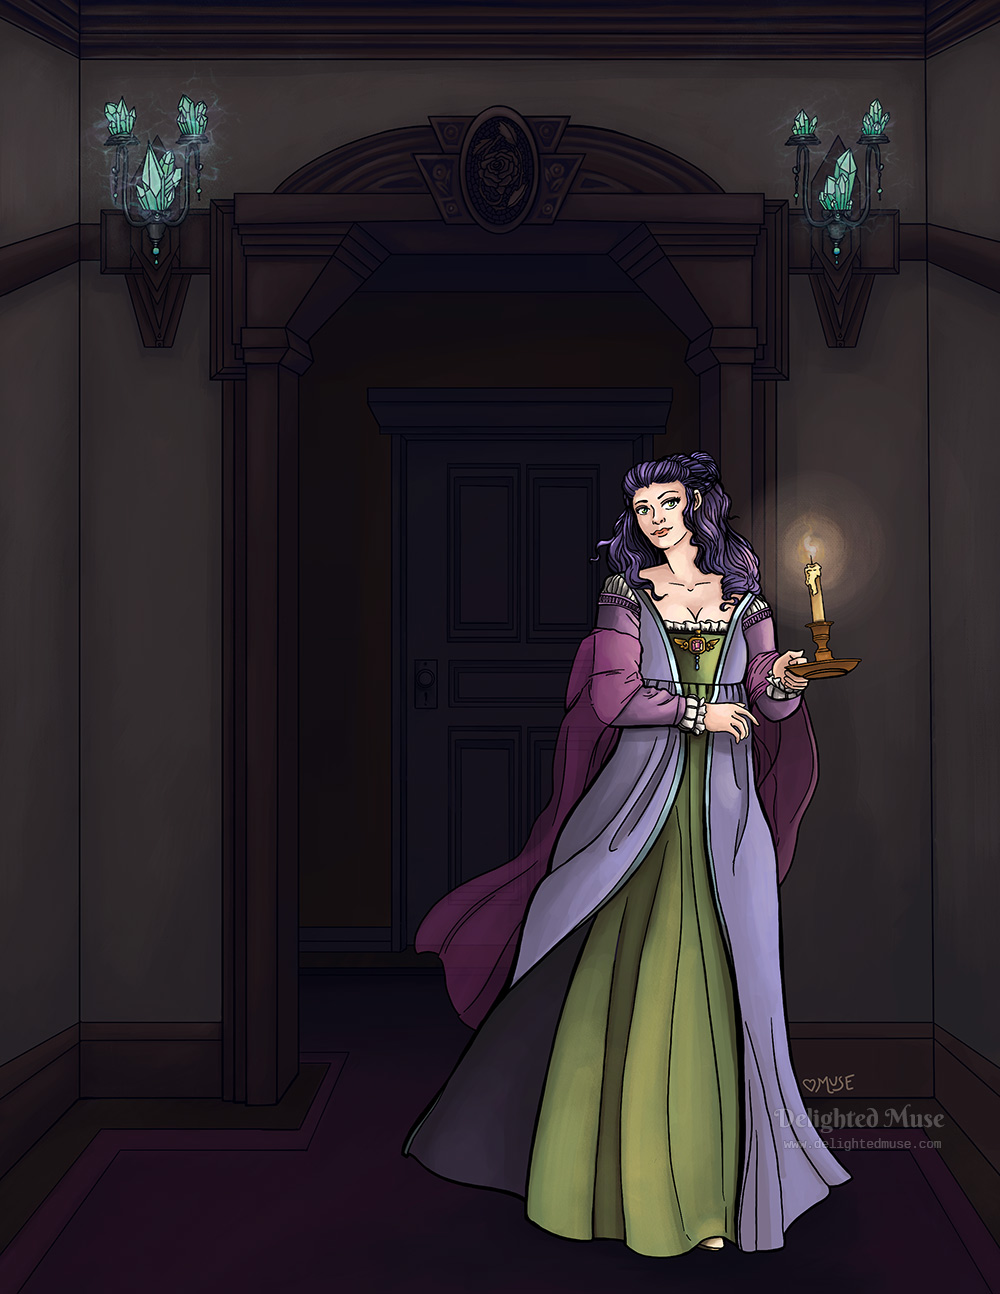 Digital painting of a woman walking through a dark hallway, with decorative woodworking around the door lintel. Strange crystals give off a light on either side of the door. The woman is wearing a bright green and purple dressing gown, and holding a lit candle in a holder.